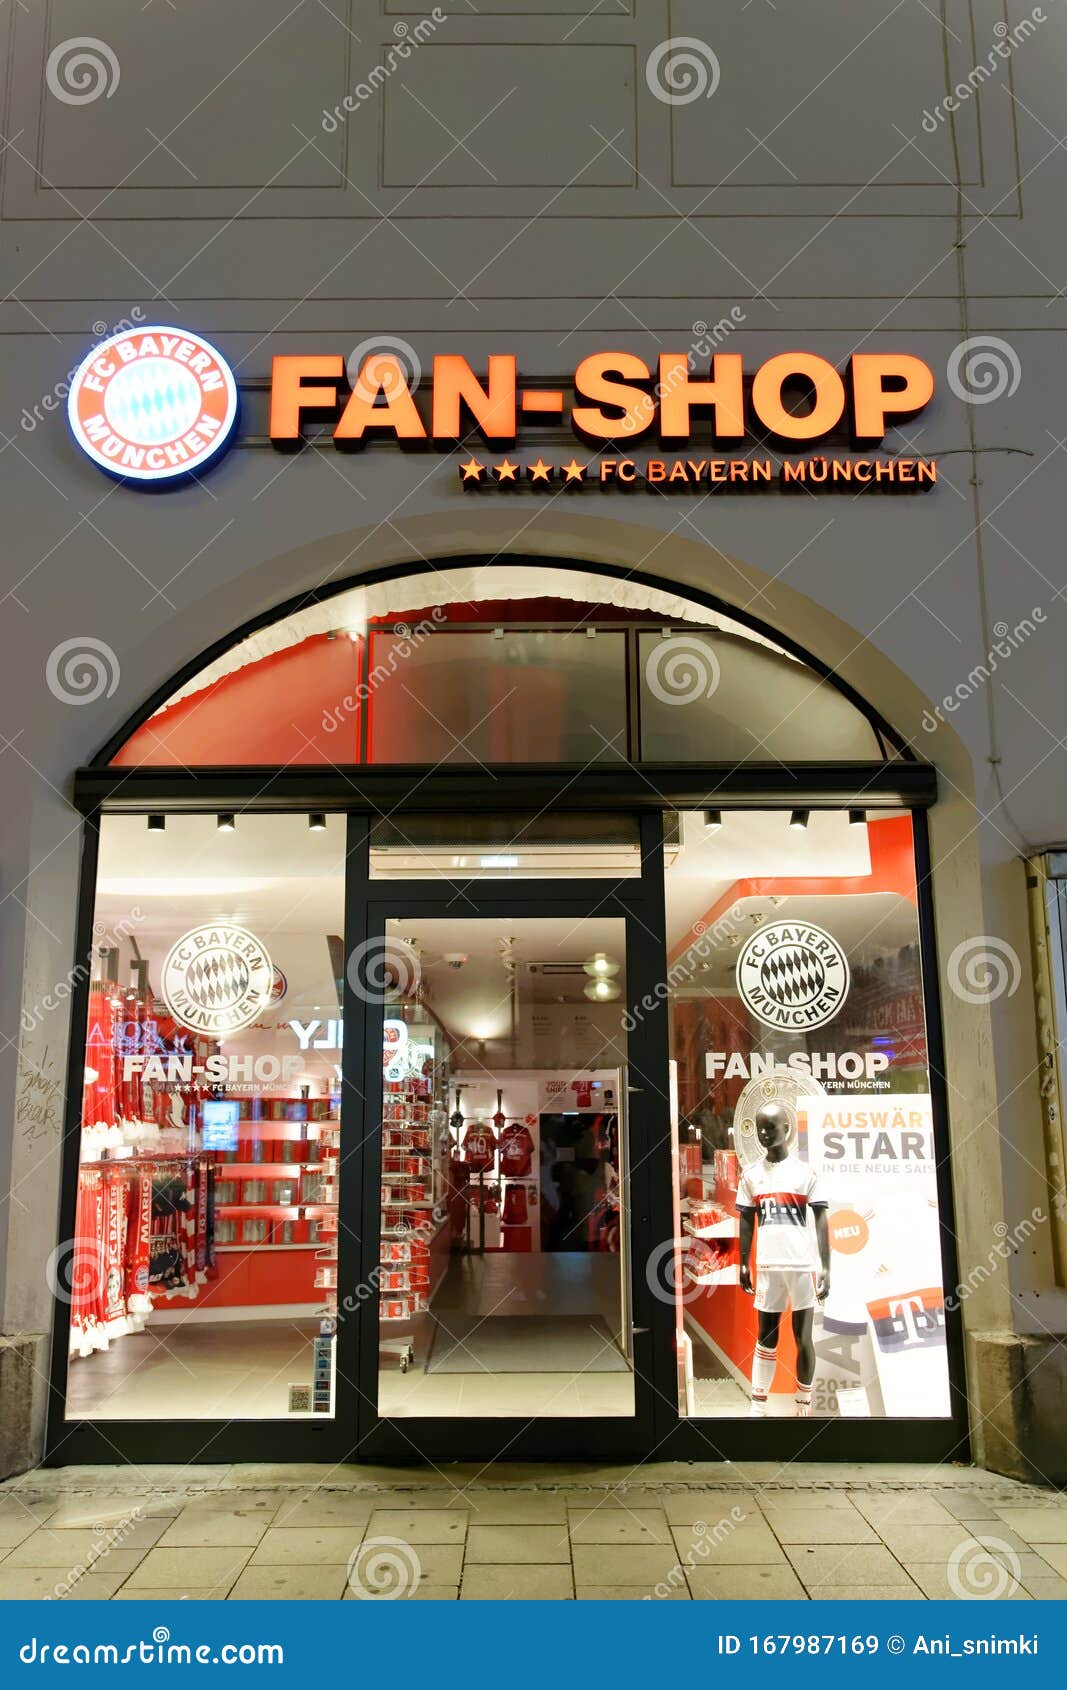 Fan Shop, Germany editorial stock image. Image of - 167987169